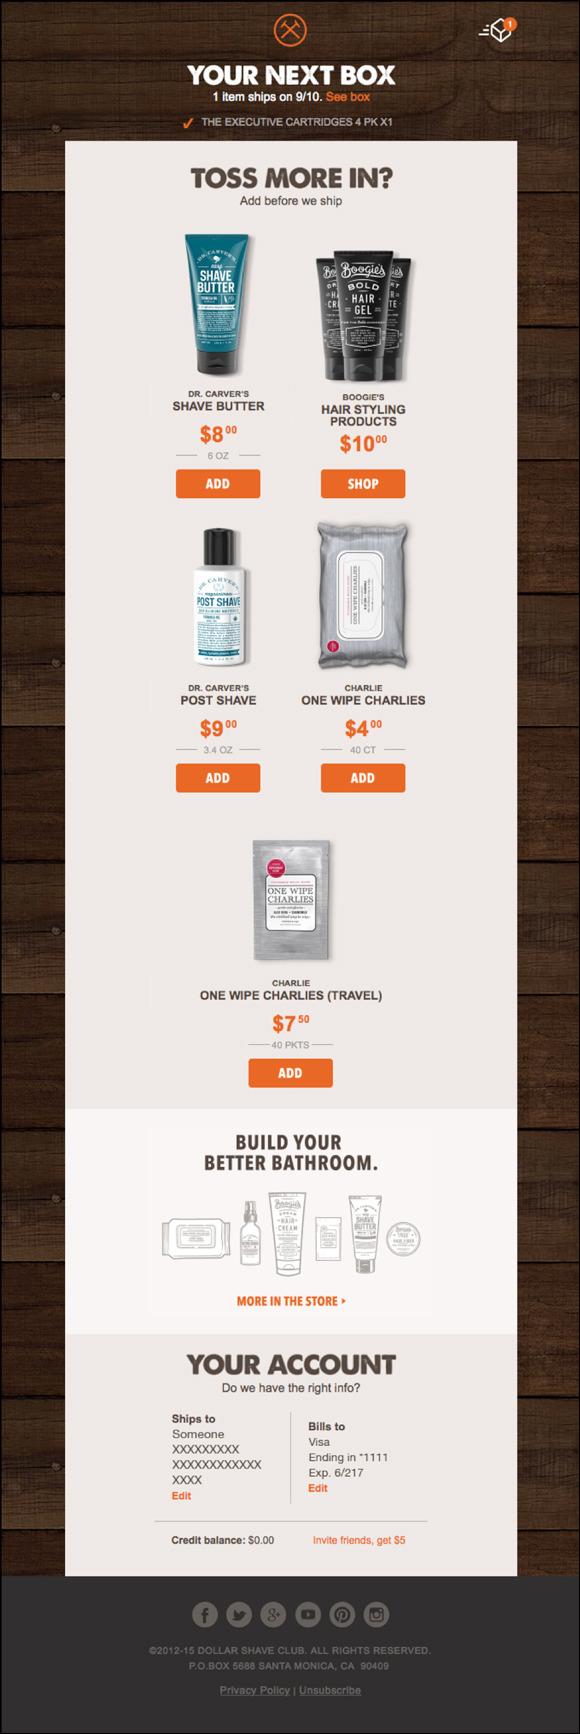 Dollar Shave Club transactional email